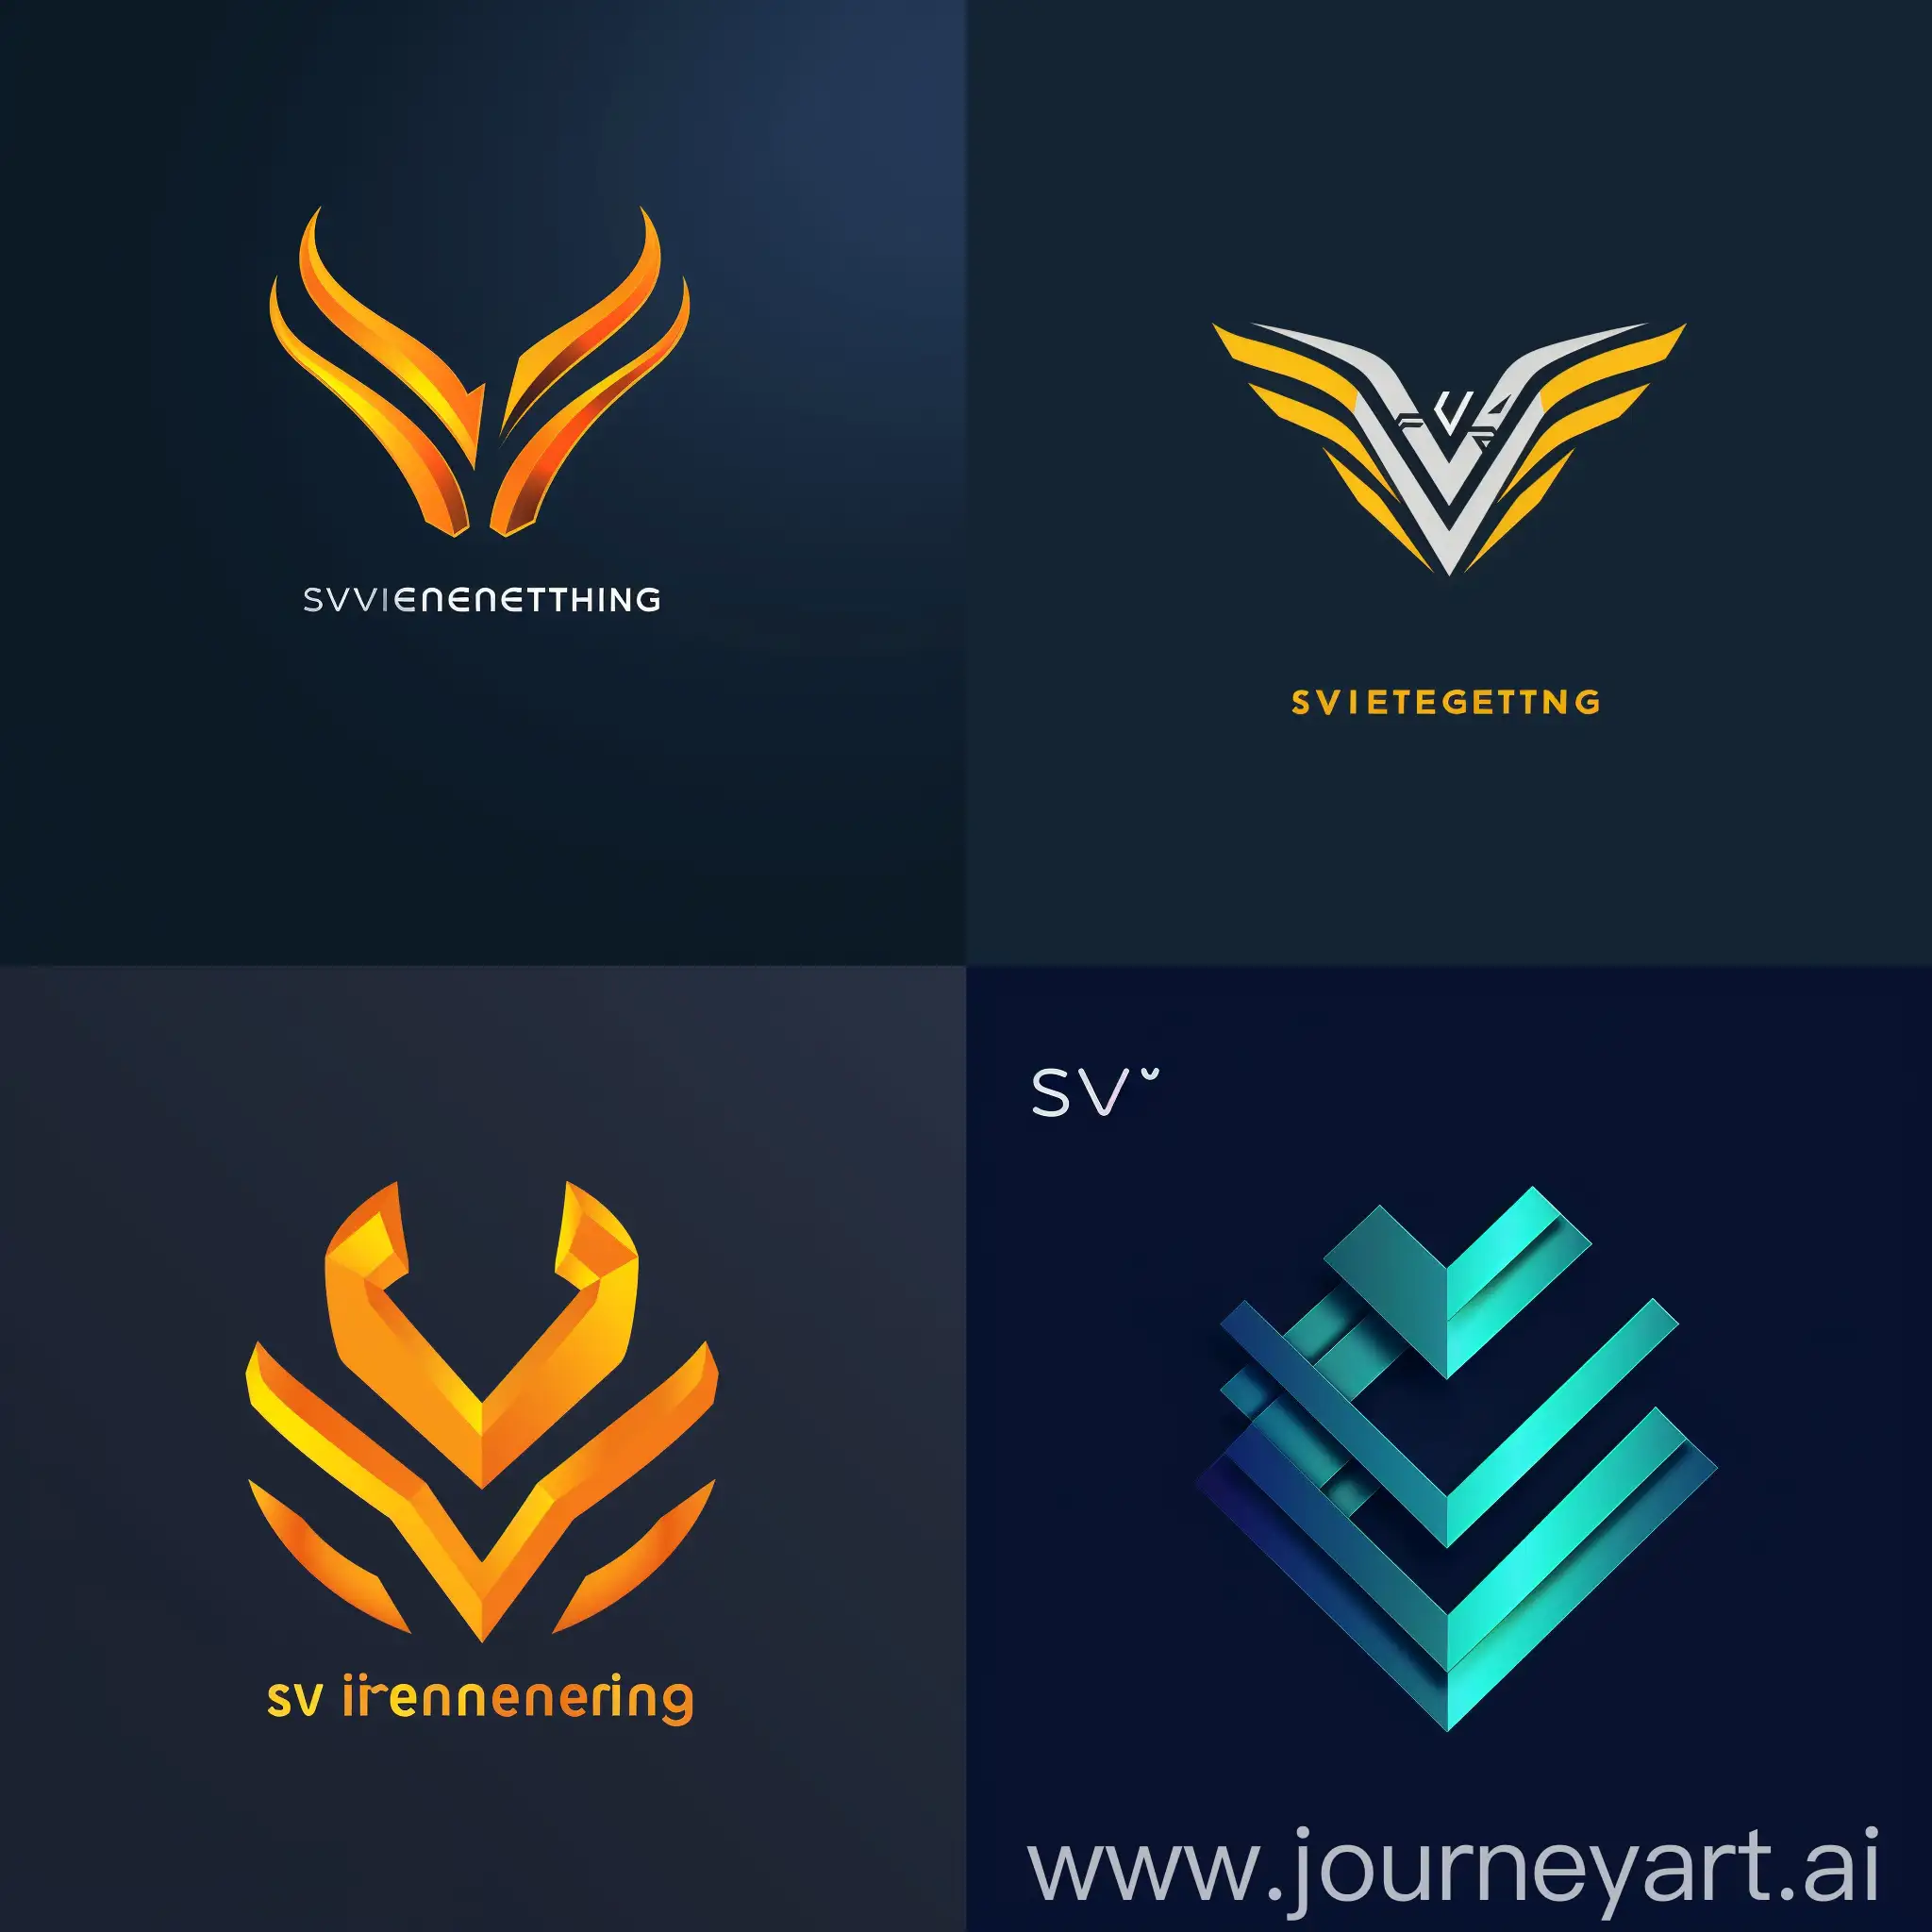 generate a company logo for company called Svengineering